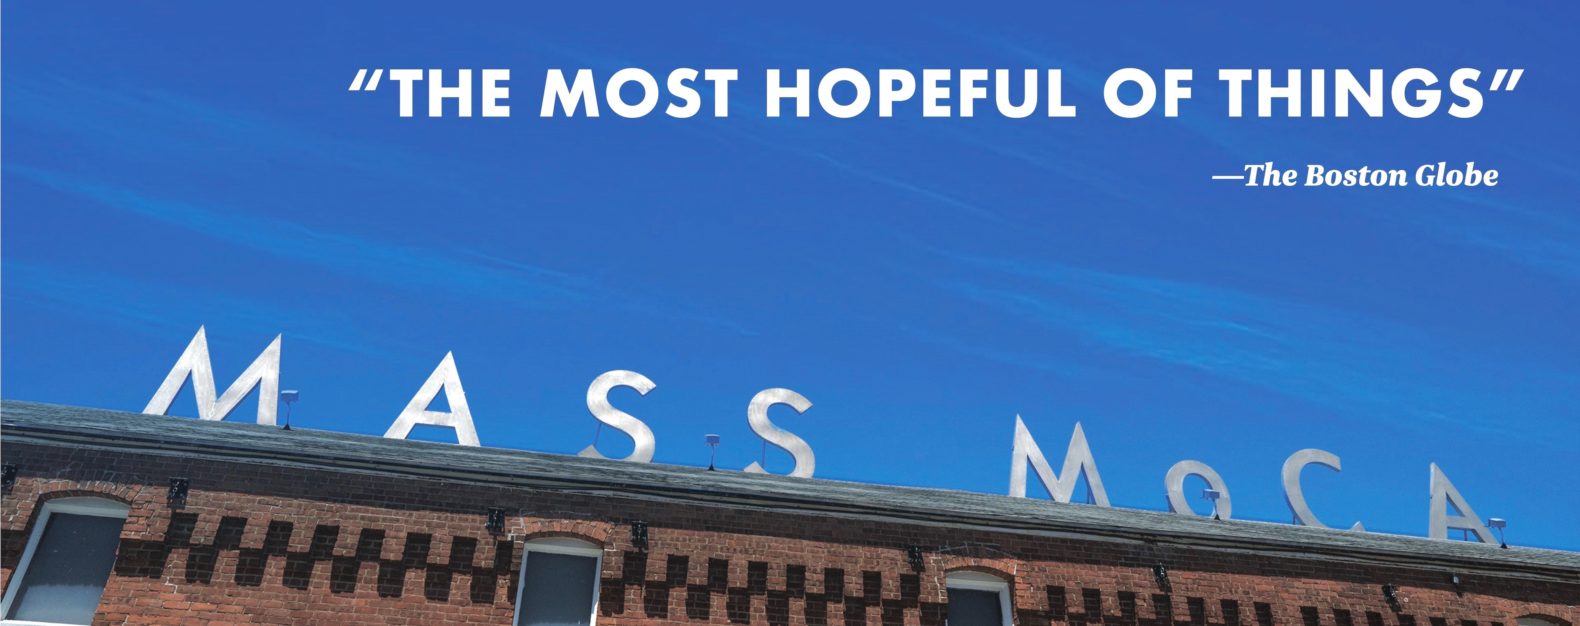 Angled up view of brick building with MASS MoCA sign and blue sky above, with text overlaid reading "The most hopeful of things"